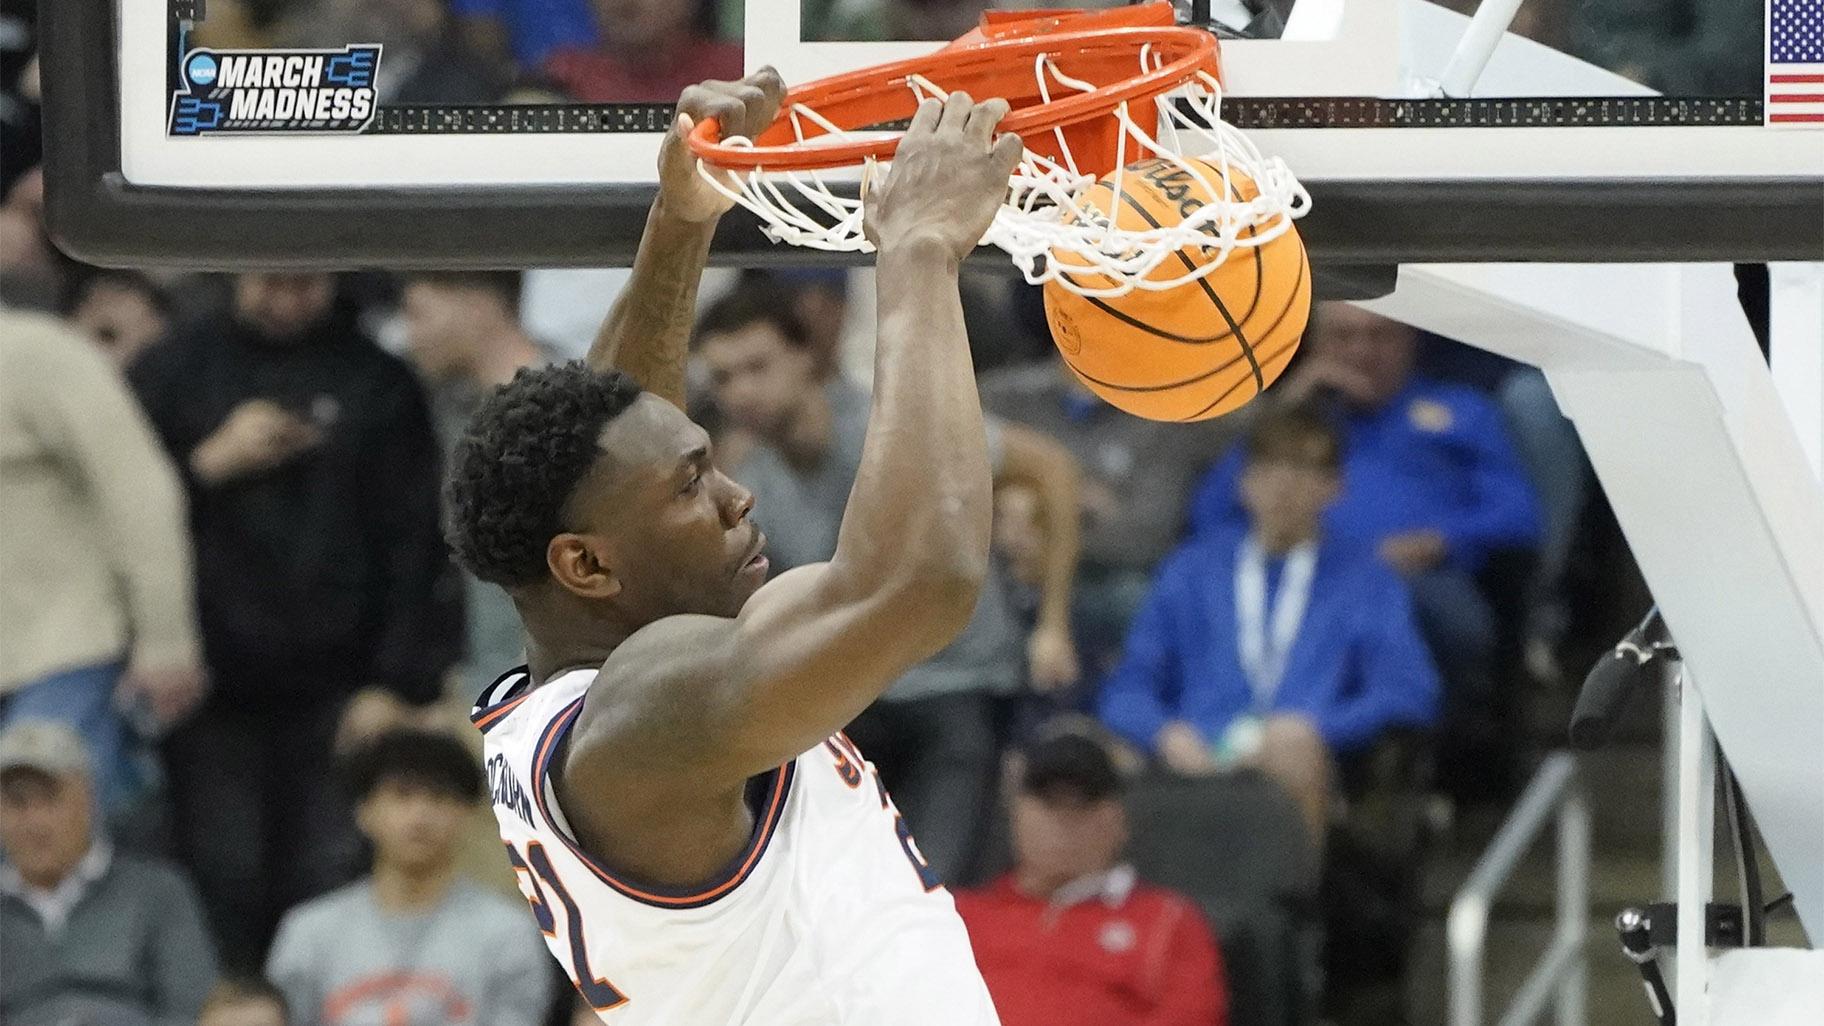 Illinois’ Kofi Cockburn dunks against Chattanooga during the first half of a college basketball game in the first round of the NCAA tournament, Friday, March 18, 2022, in Pittsburgh. (AP Photo / Keith Srakocic)